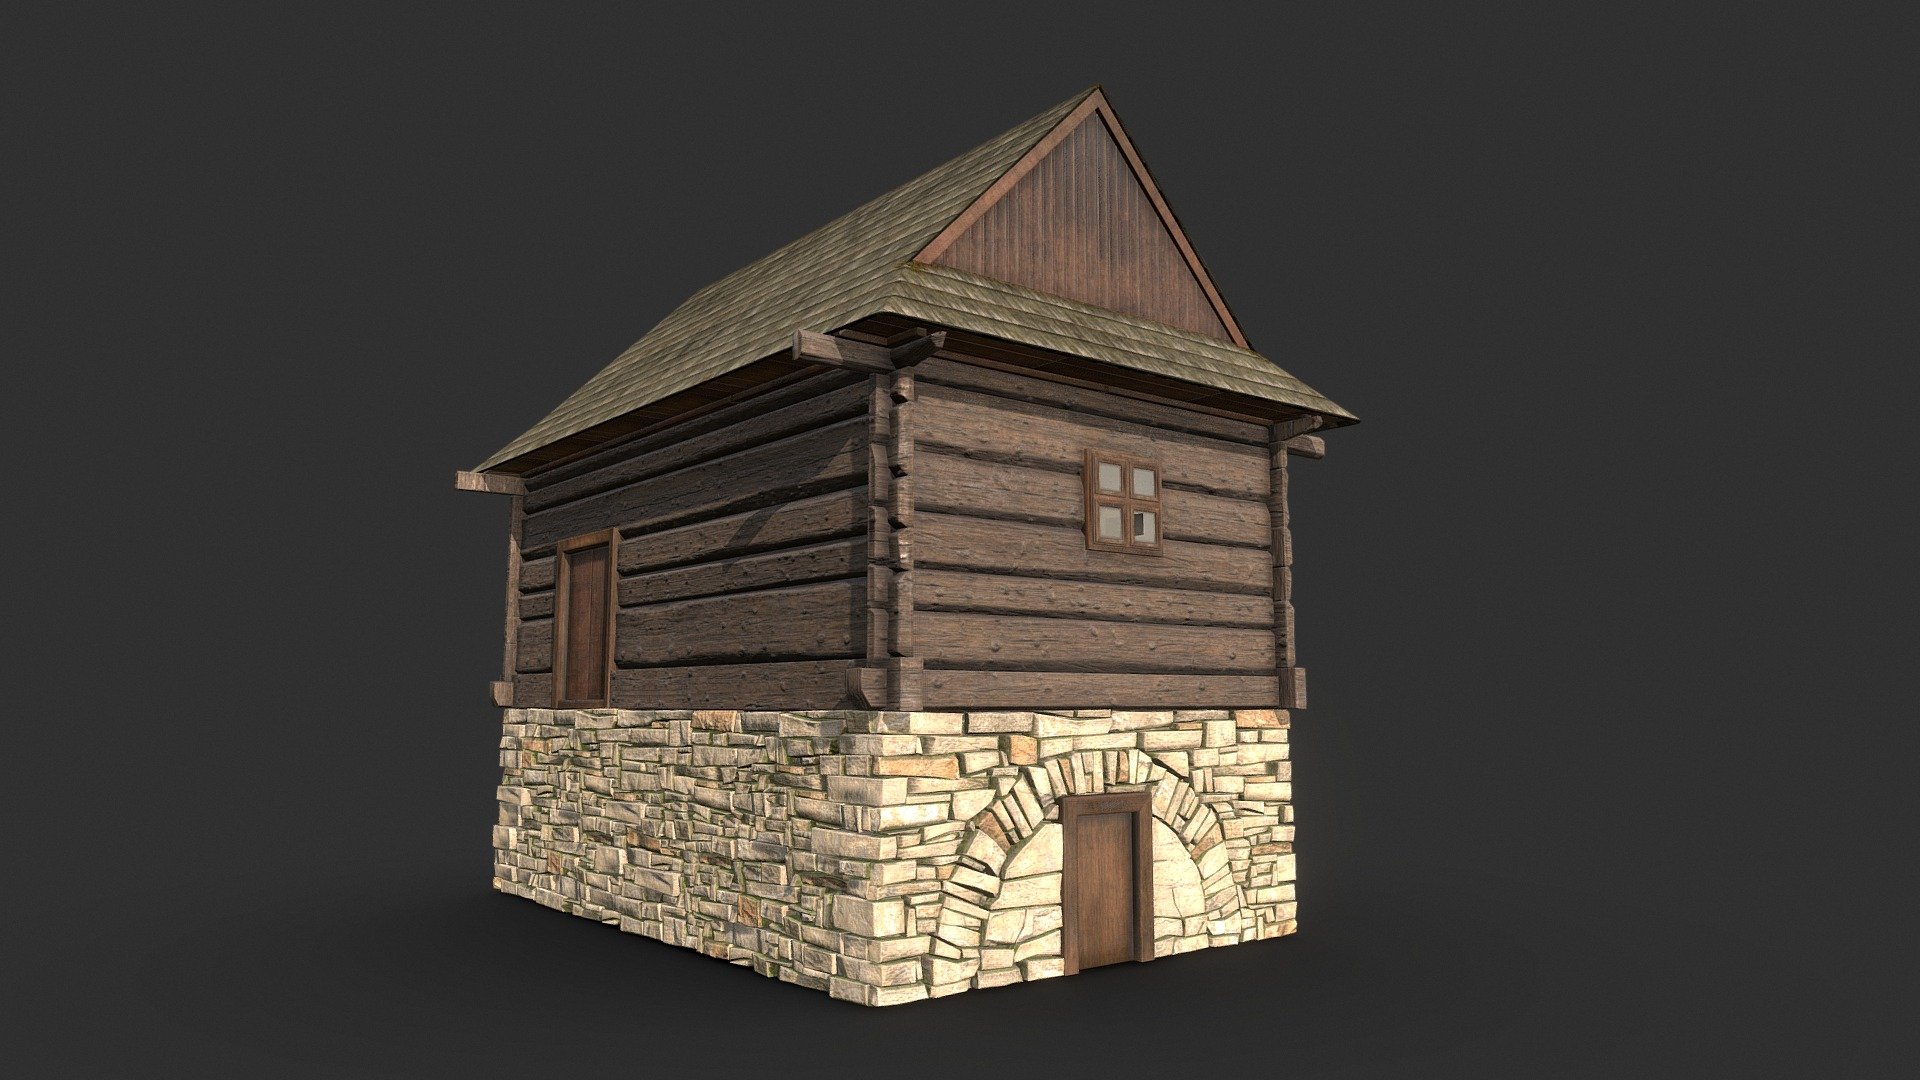 3d model of old Granary Building

Architecture from west Europe - Poland




High resolution of texture: 4096x4096

Originally created with 3ds Max 2014.

Unit system is set to centimetre.

Model is built to real-world scale

Texture Set PBR: Diffuse, Base Color, IOR, Gloss, Heigh, IOR, Normal, Reflection, Specular, Opacity

Previews rendered in Mormoset Toolbag and 3ds Max 2014 using V-ray Adv 2.3.

.obj/fbx format is recommended for import in other 3d software. If your software doesn't support .obj format, please use .3ds/fbx format;

.obj, format was exported from 3ds Max. The geometry for .obj format is set to quads. .max files can be loaded in 3ds Max 2014 or higher.

In order to use Vray rendering setups and materials, V-ray Adv 2 or higher is required
 - Grannary - Buy Royalty Free 3D model by danielmikulik 3d model